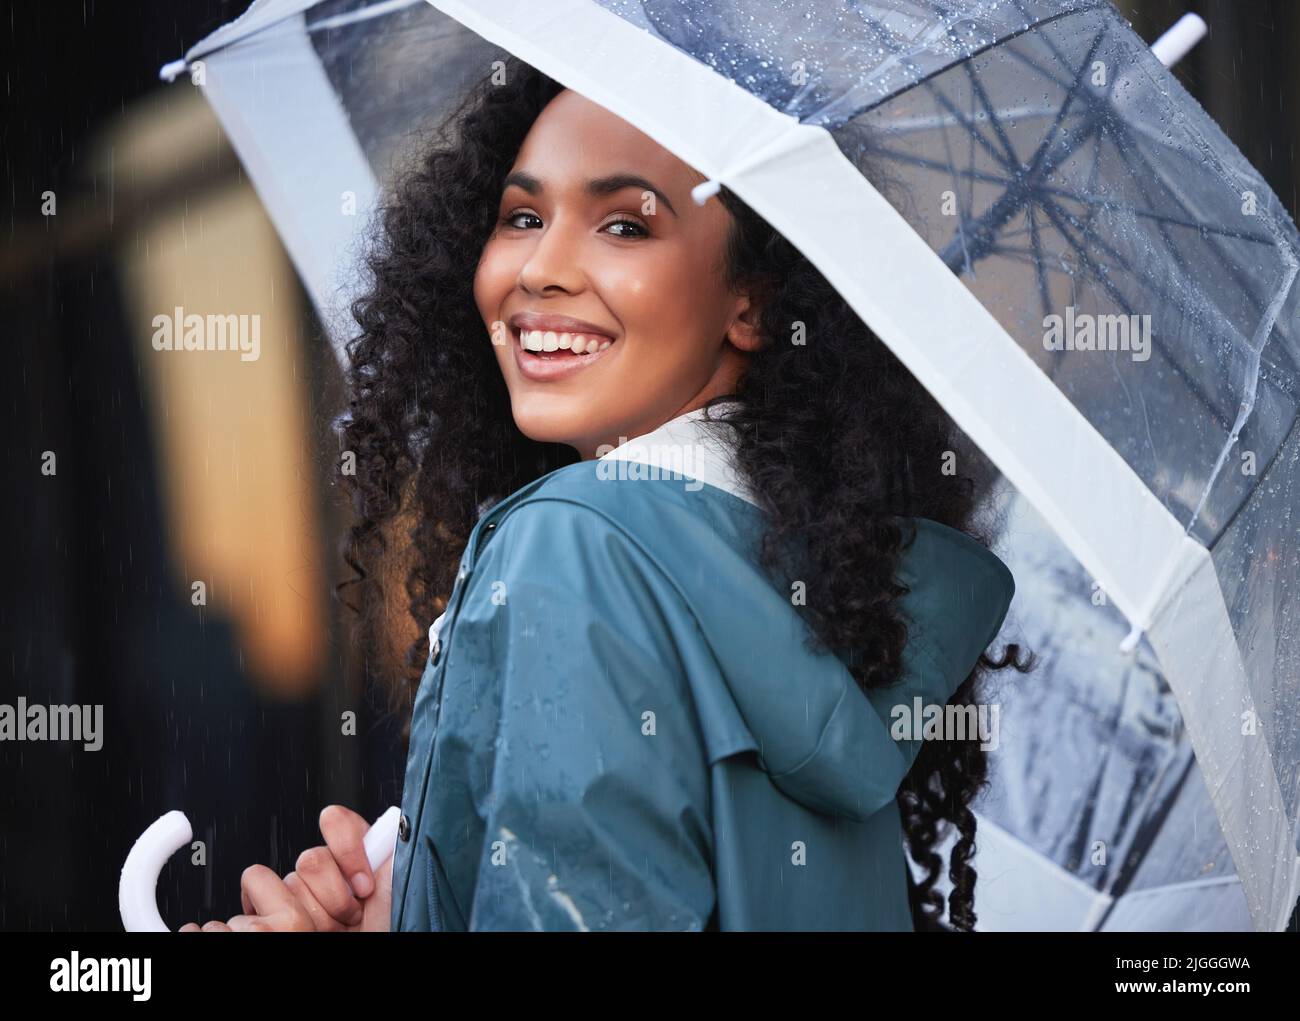 This really is my kind of weather. a young woman holding an umbrella in the city. Stock Photo